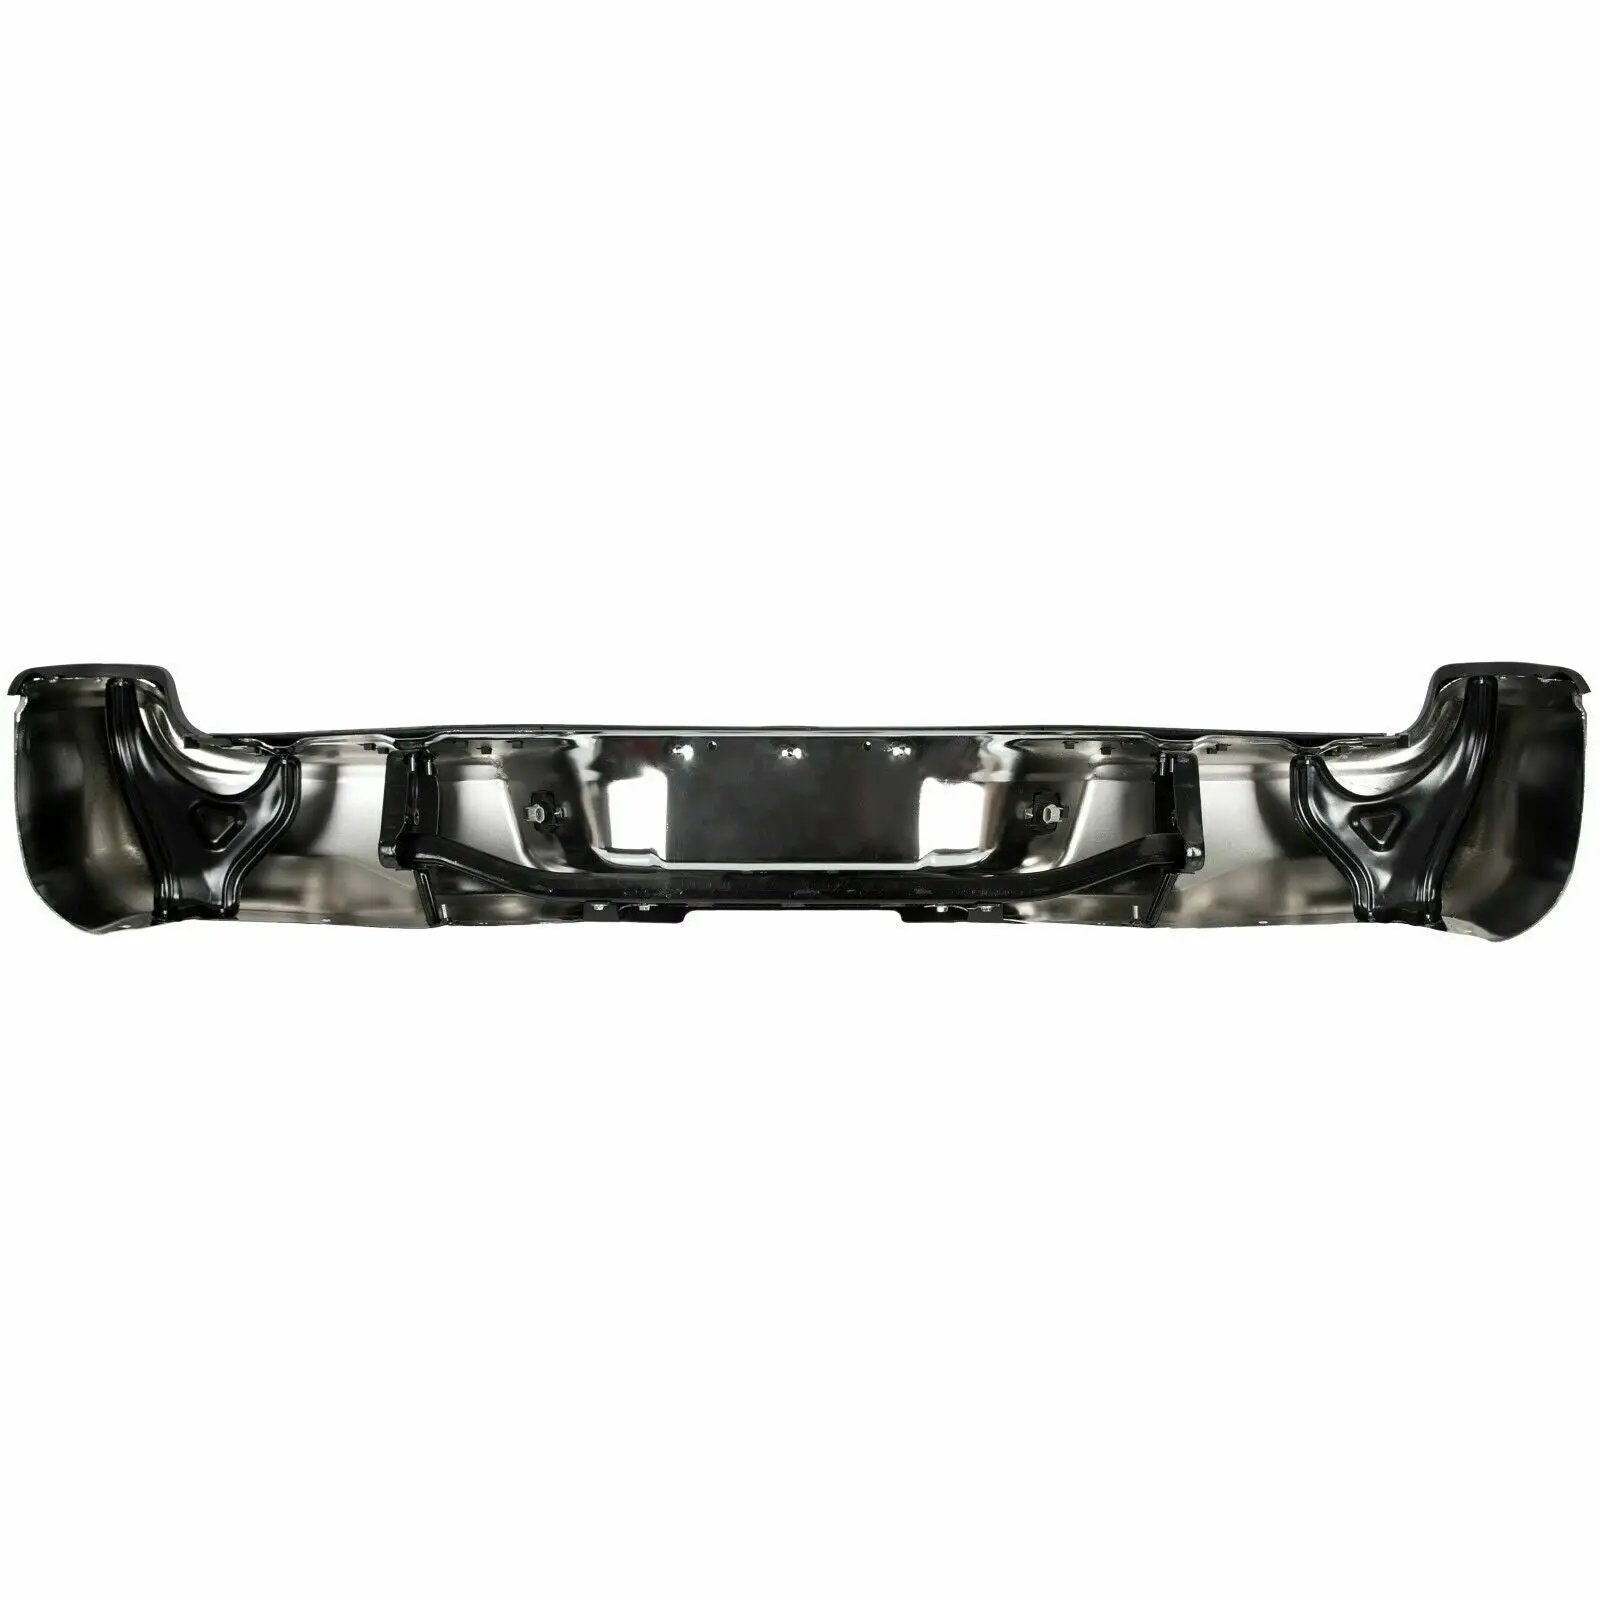 Chrome Rear Step Bumper Assembly For 2005-2015 Toyota Tacoma Pickup